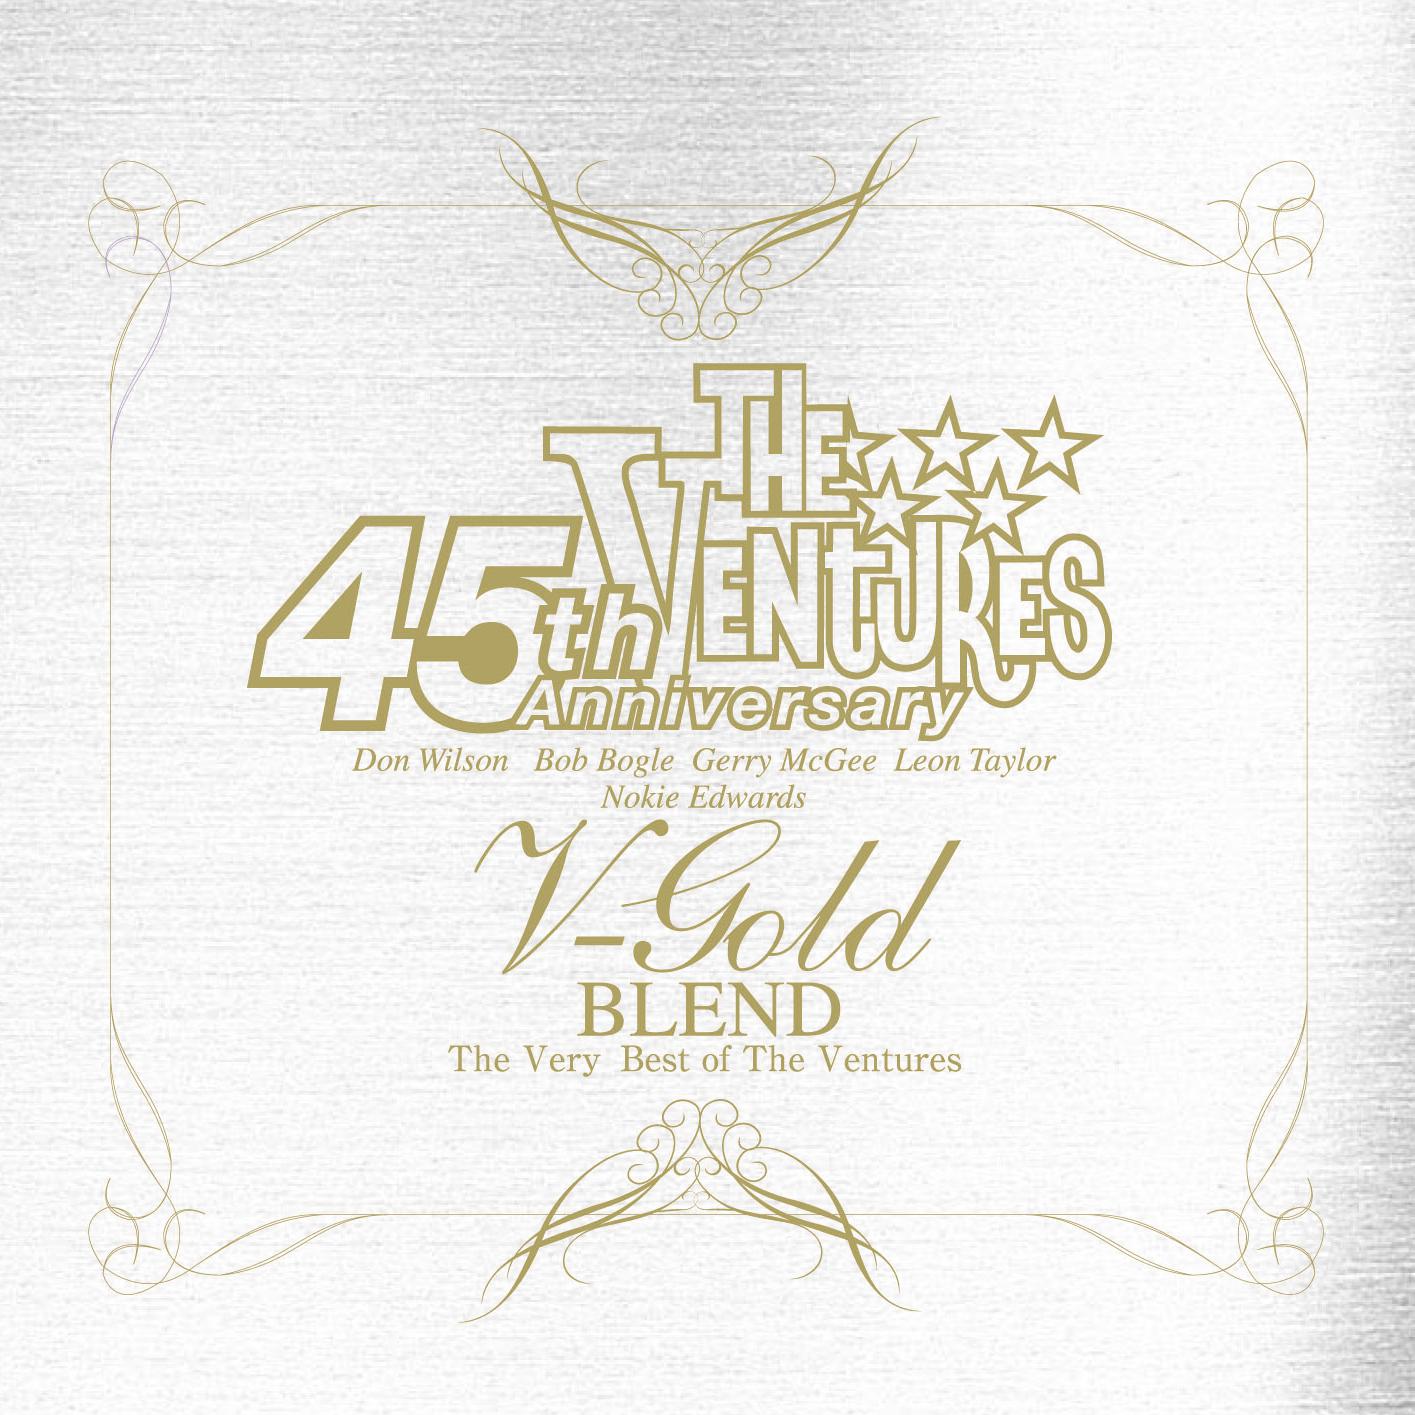 V-Gold BLEND～The Very Best of The Ventures